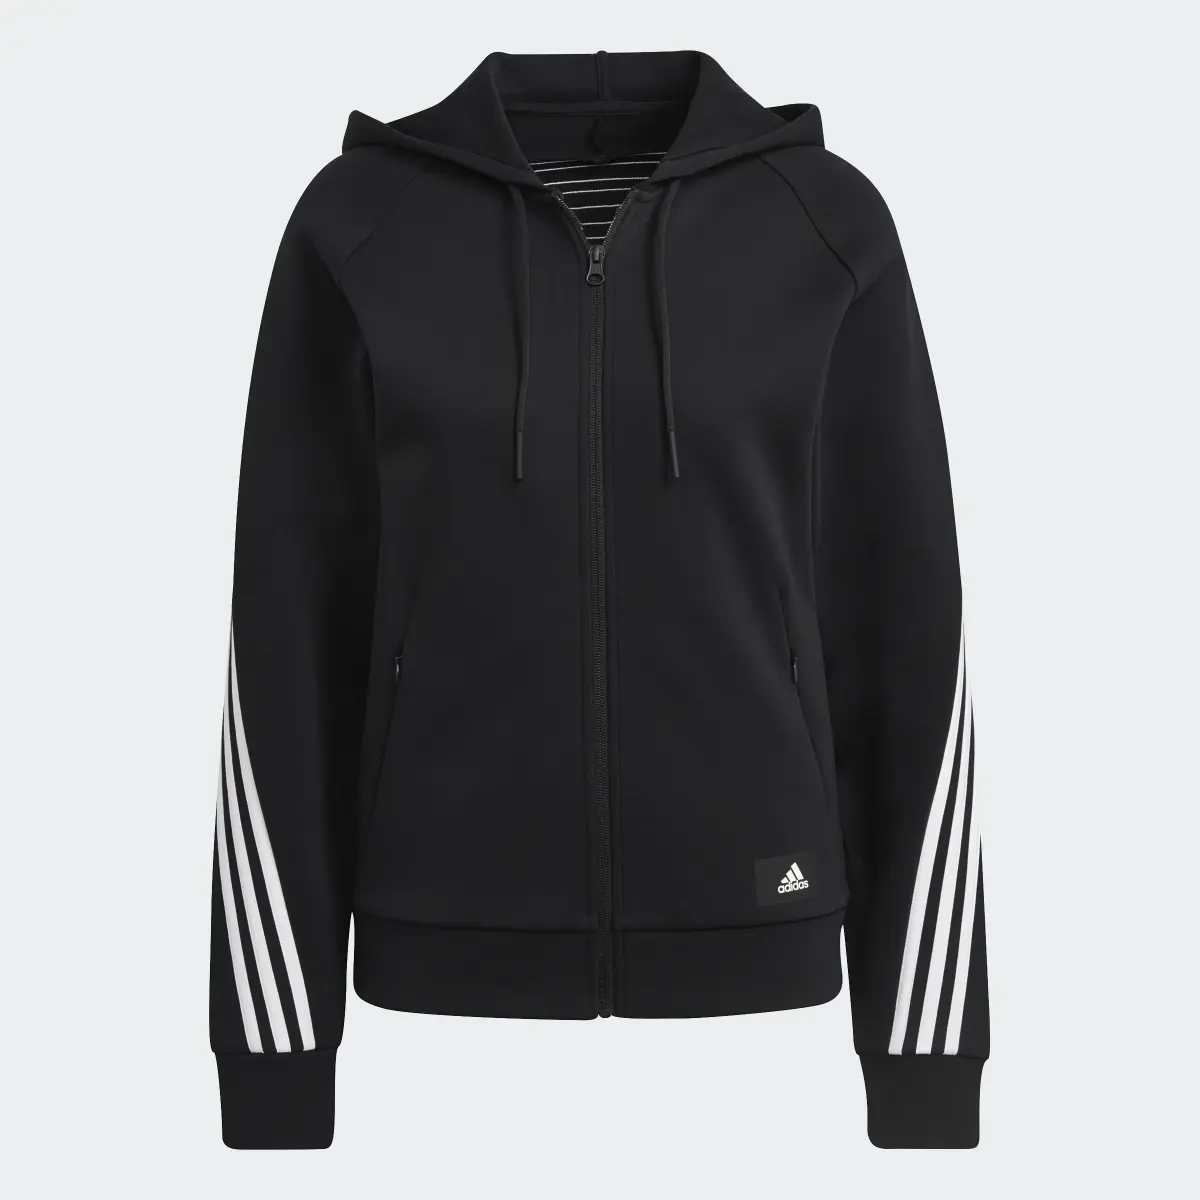 Adidas Sportswear Future Icons 3-Stripes Hooded Track Top. 1